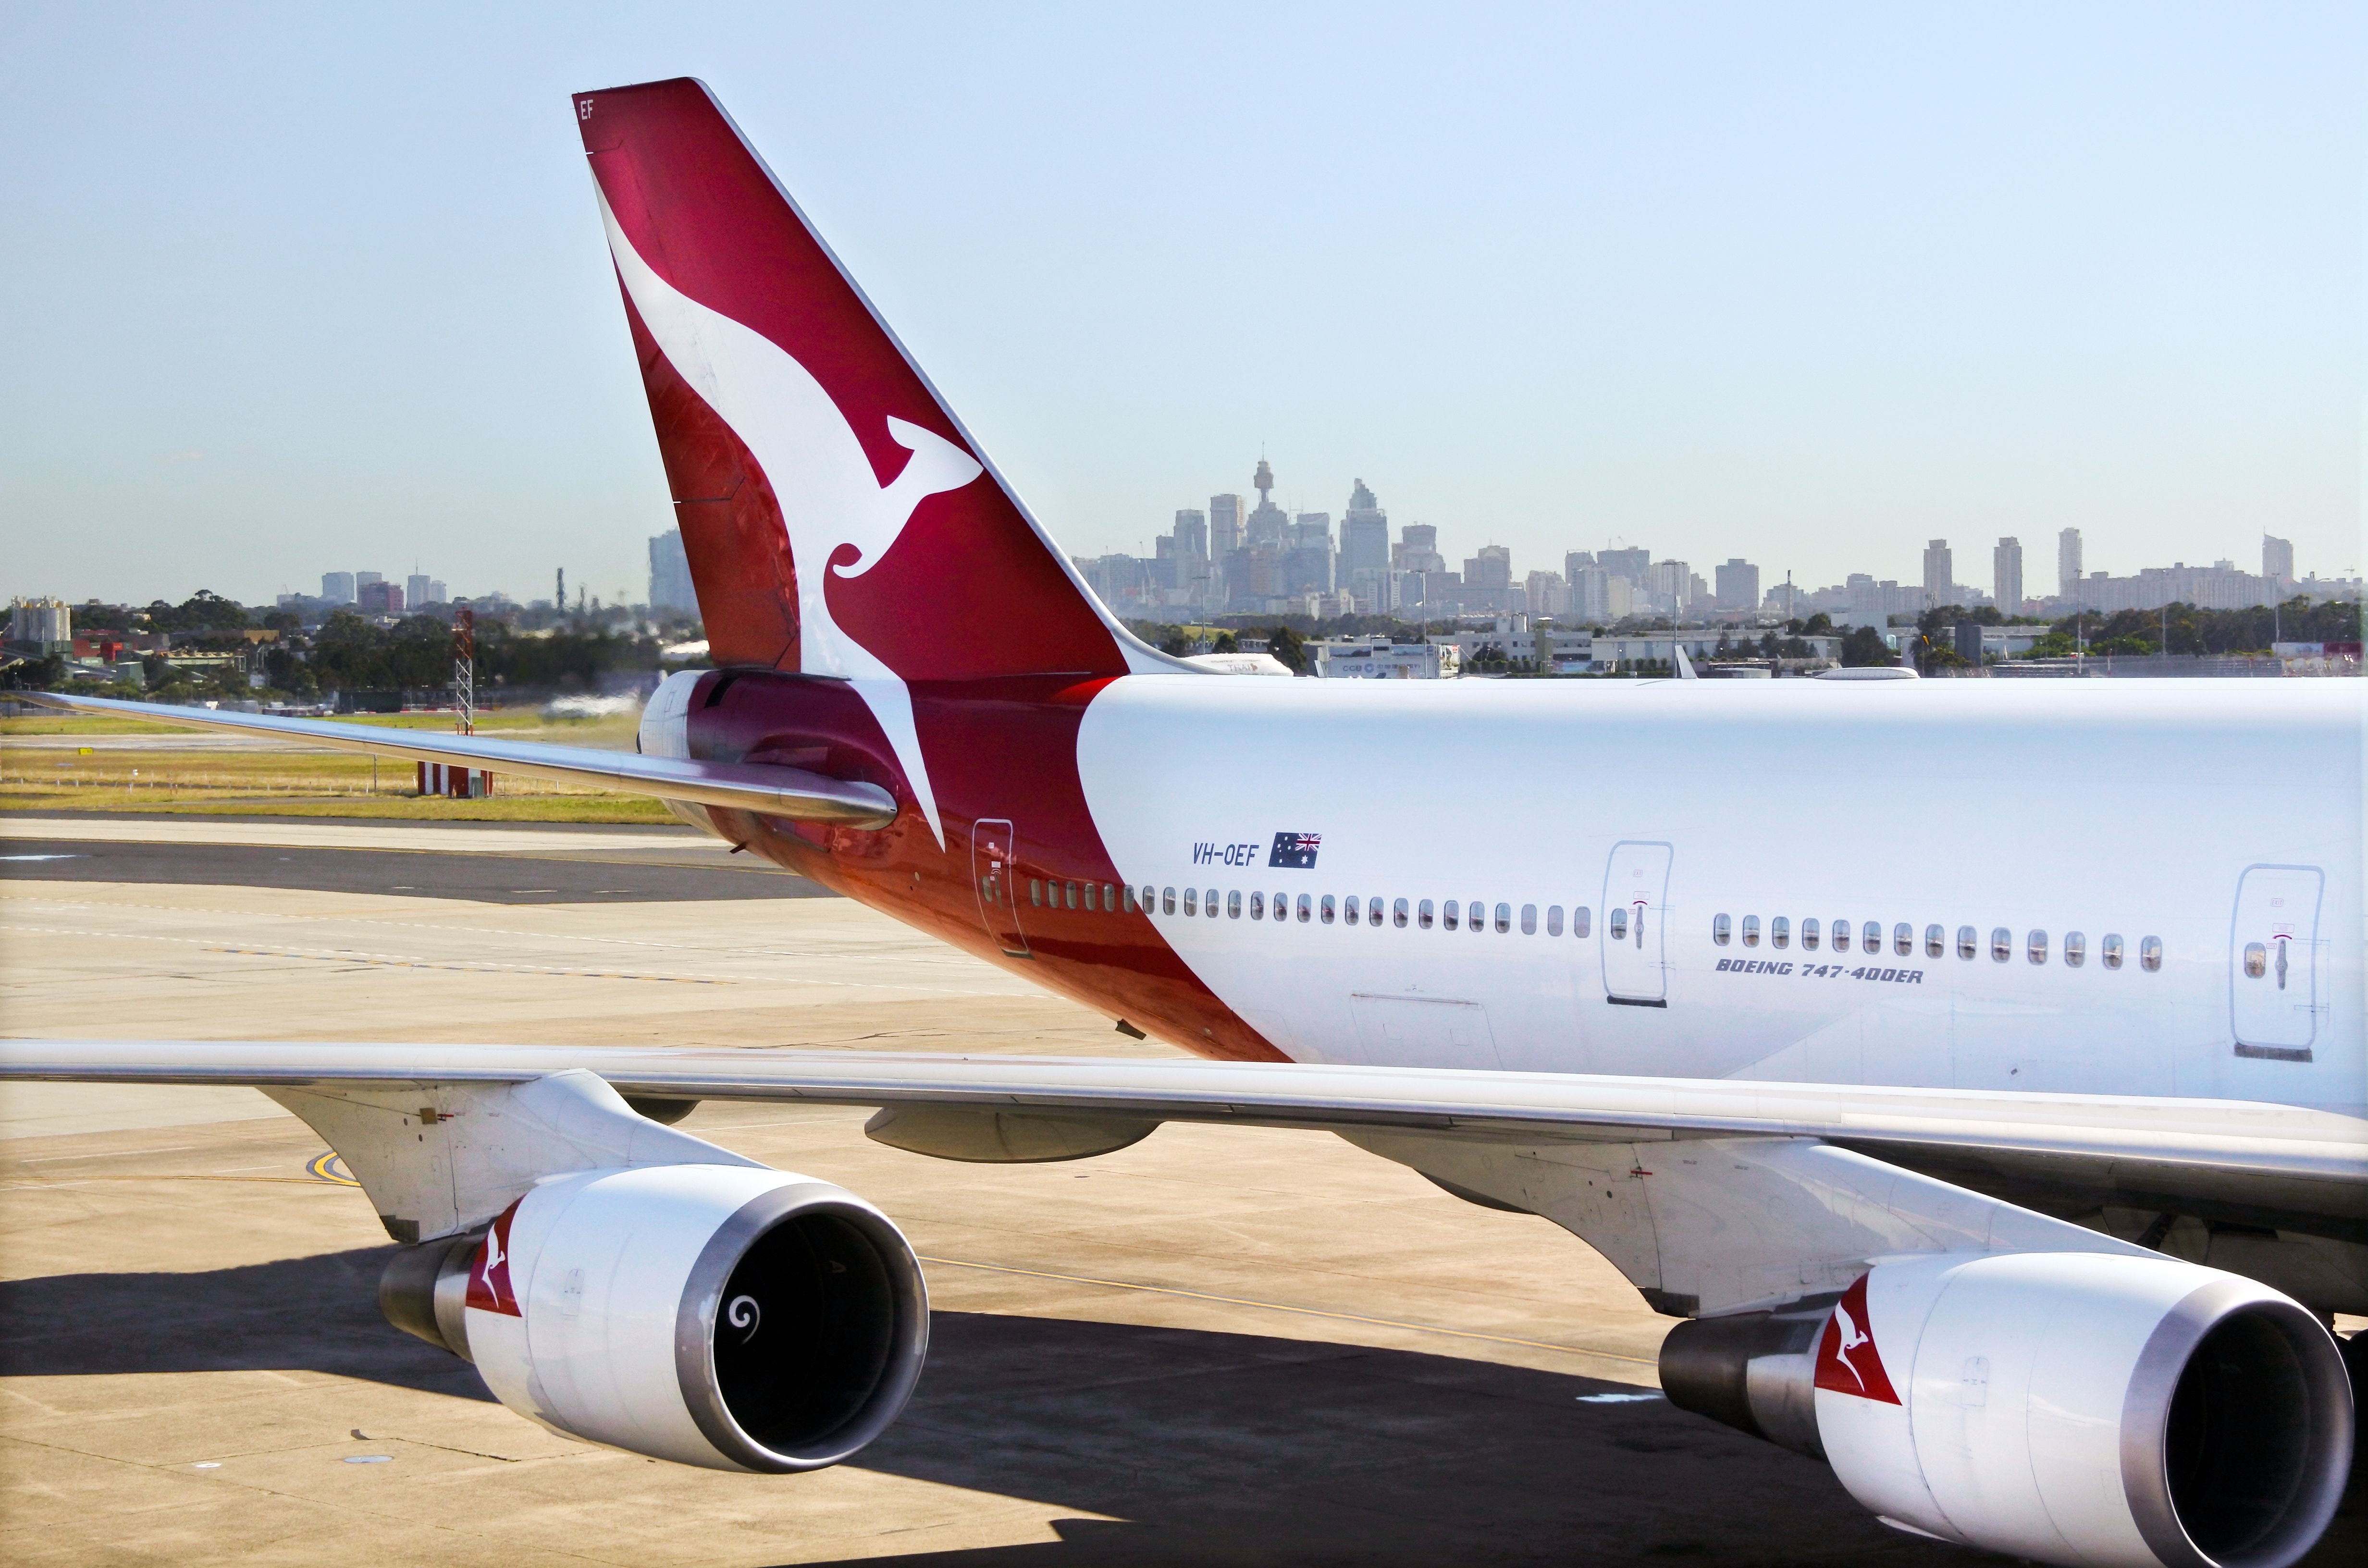 Qantas allows the use of baggage trackers